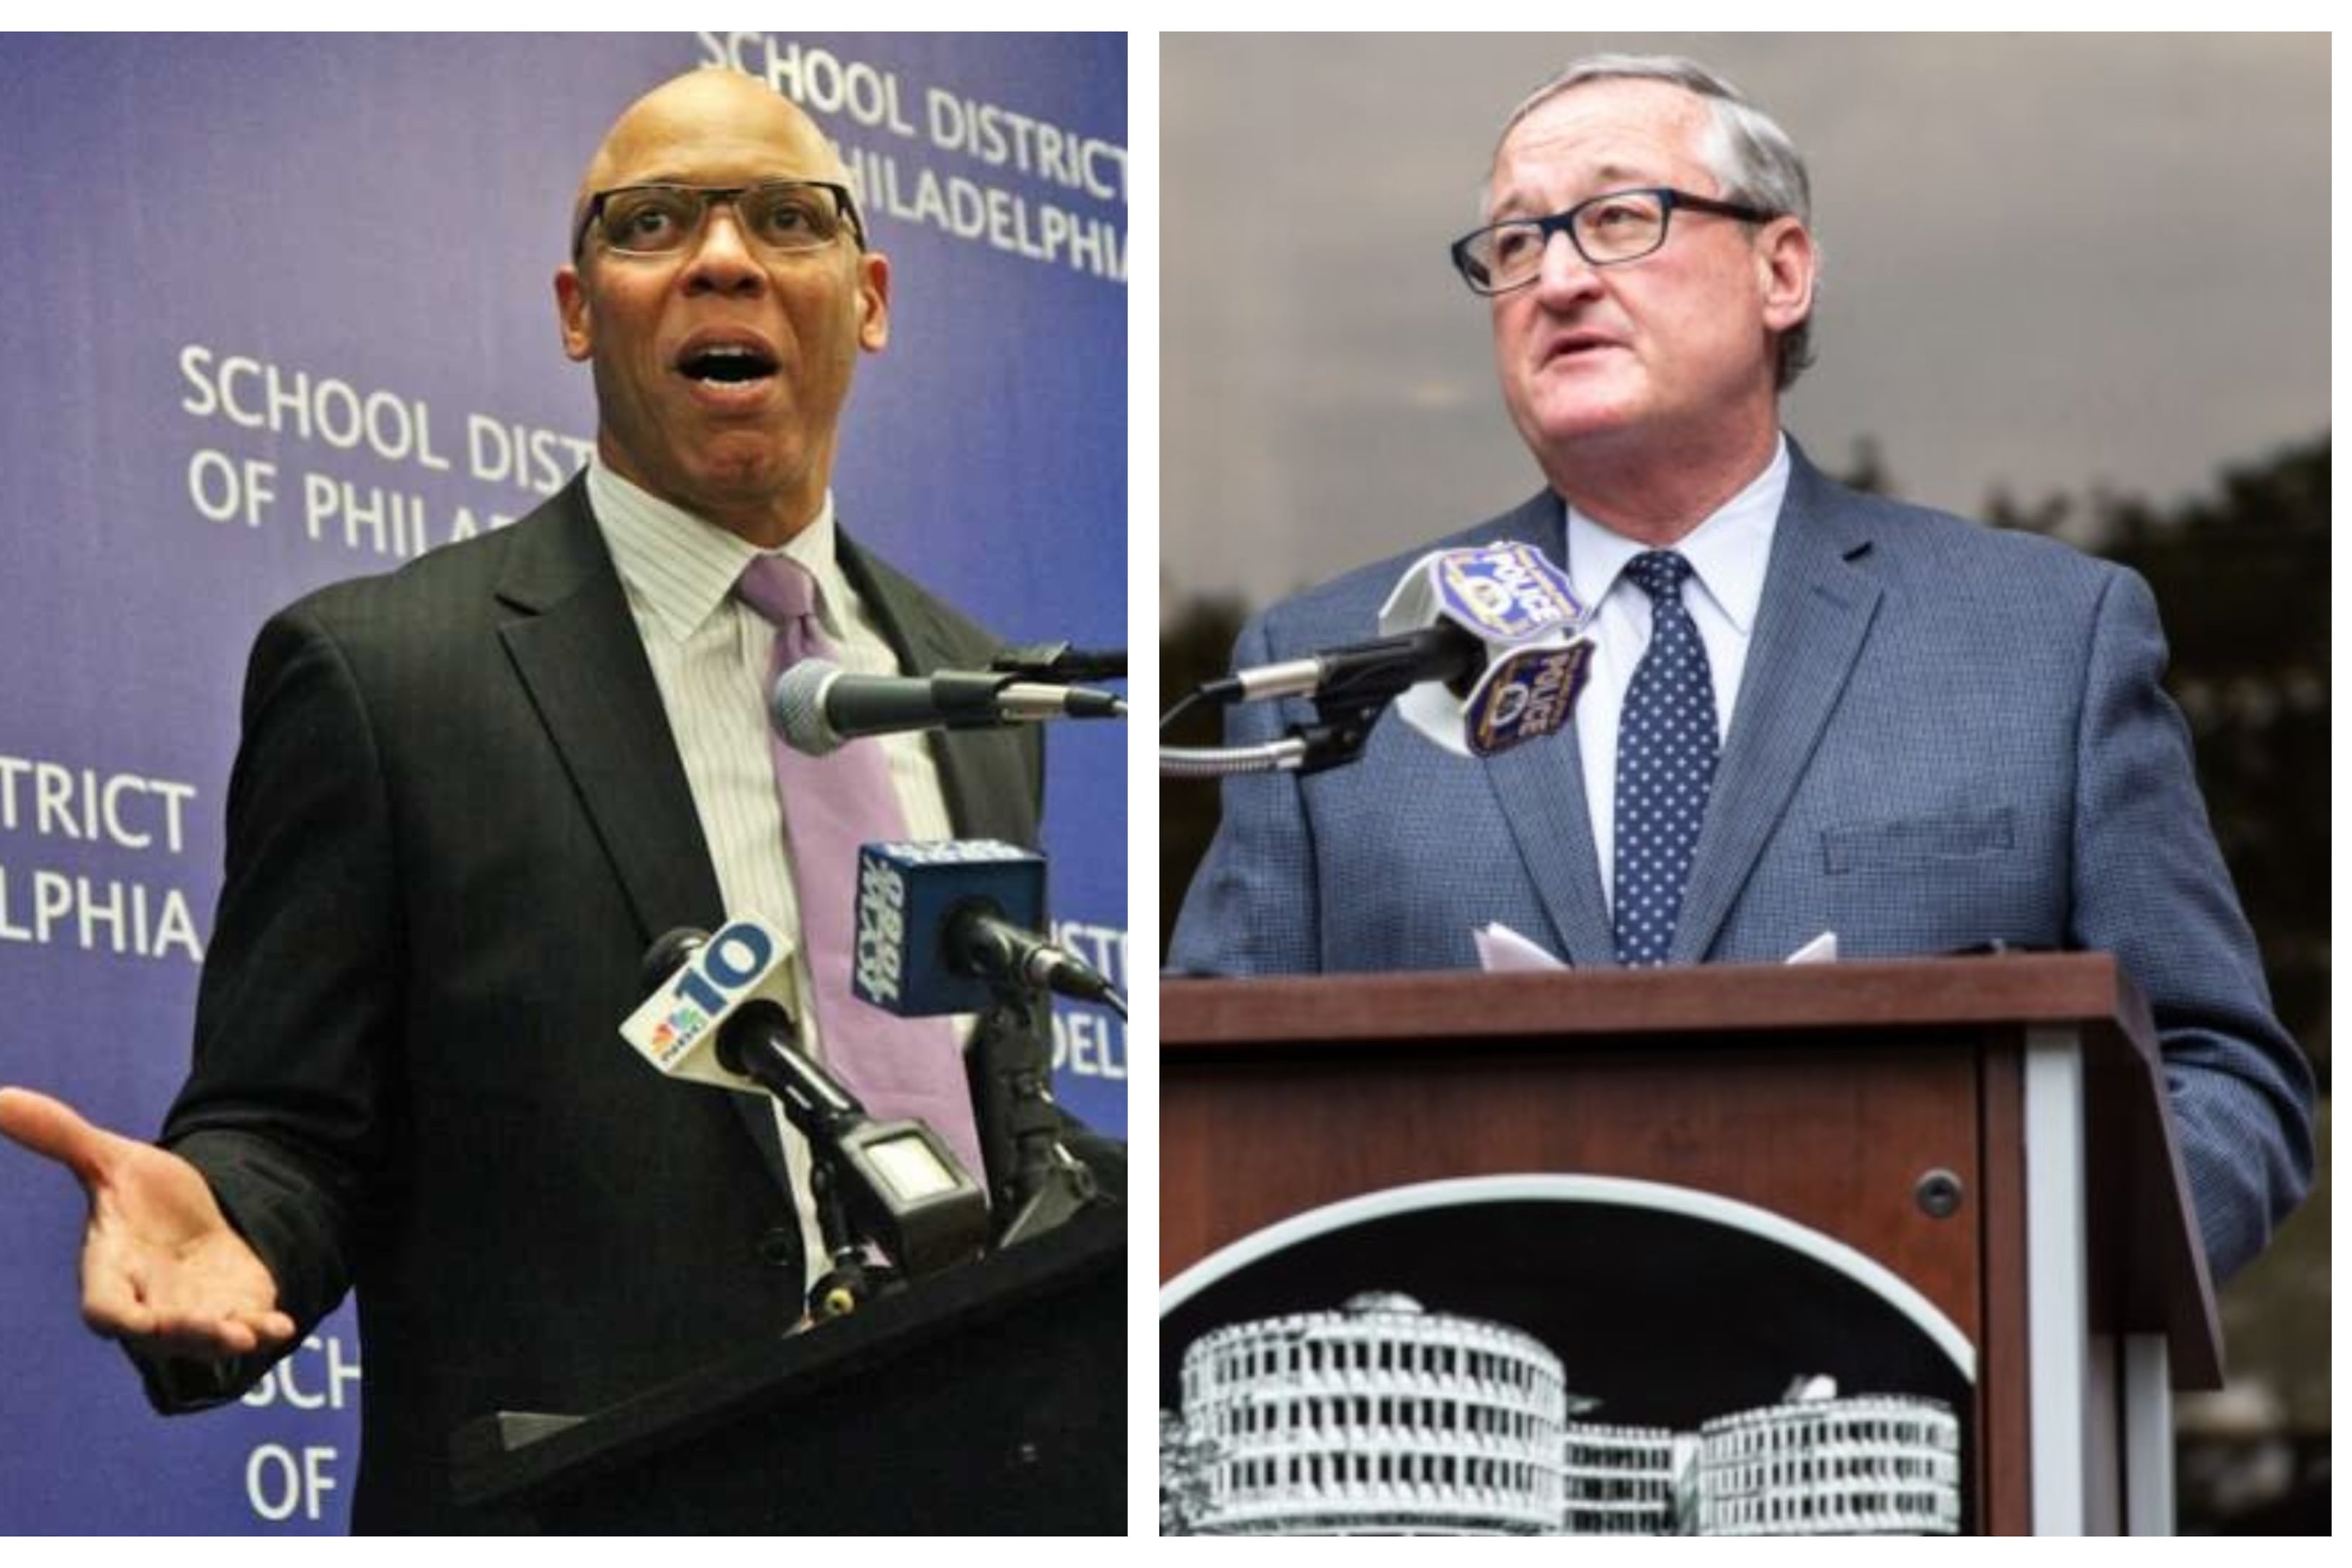 Split image of William Hite speaking at a microphone on the left and Jim Kenney speaking at a microphone on the right.